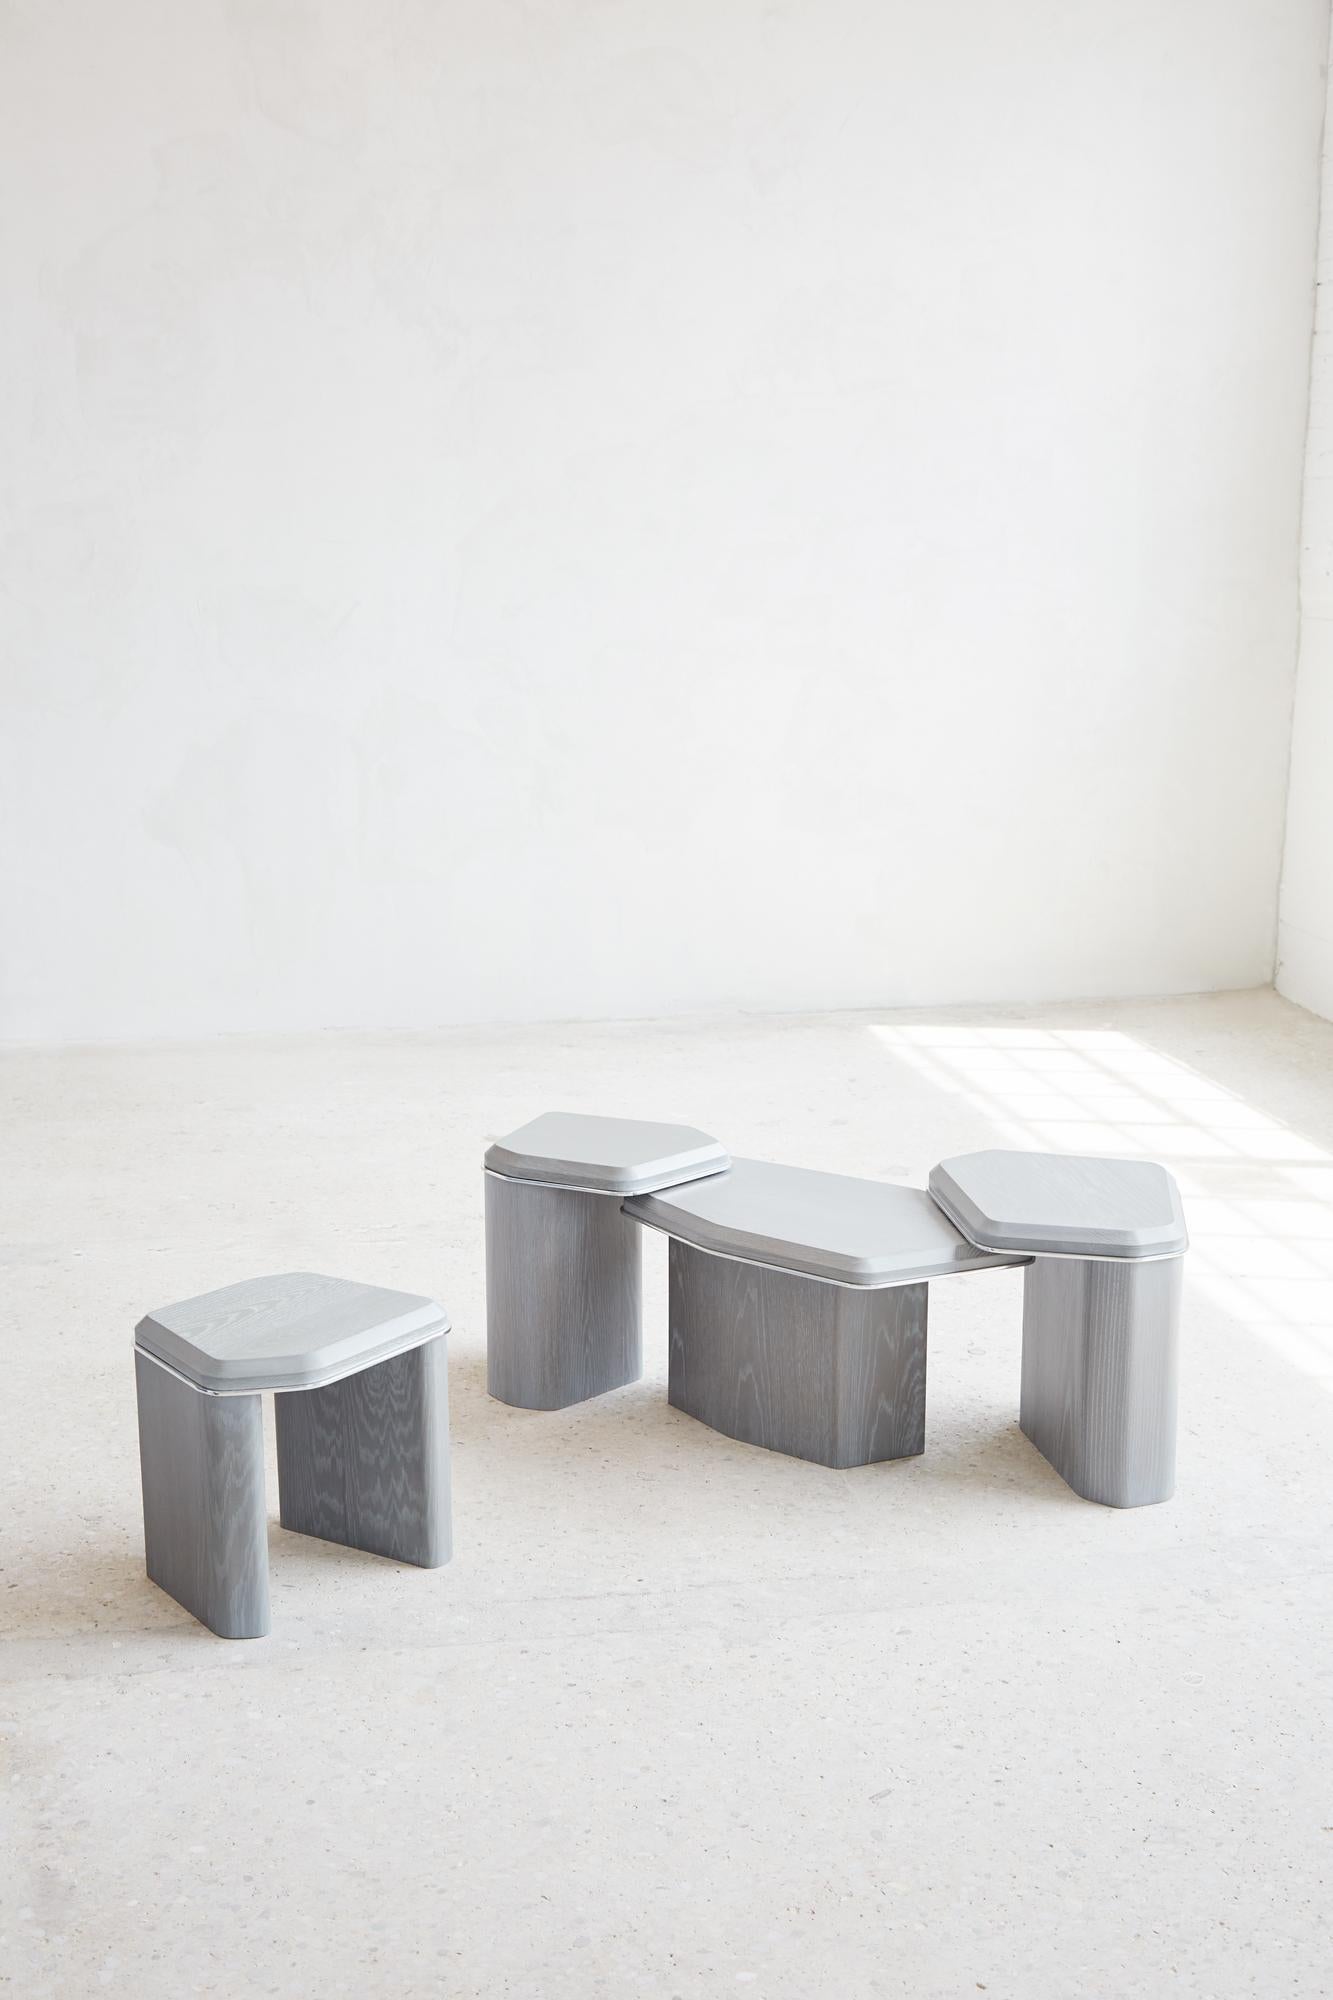 GEOMORPH SIDE TABLE
A sister product to the Console Table, the Geomorph Side Table is inspired by the iconic metamorphic rock formations of the Canadian Shield and fabricated with oak and aluminum. Its shapes have a geometric but rounded quality to